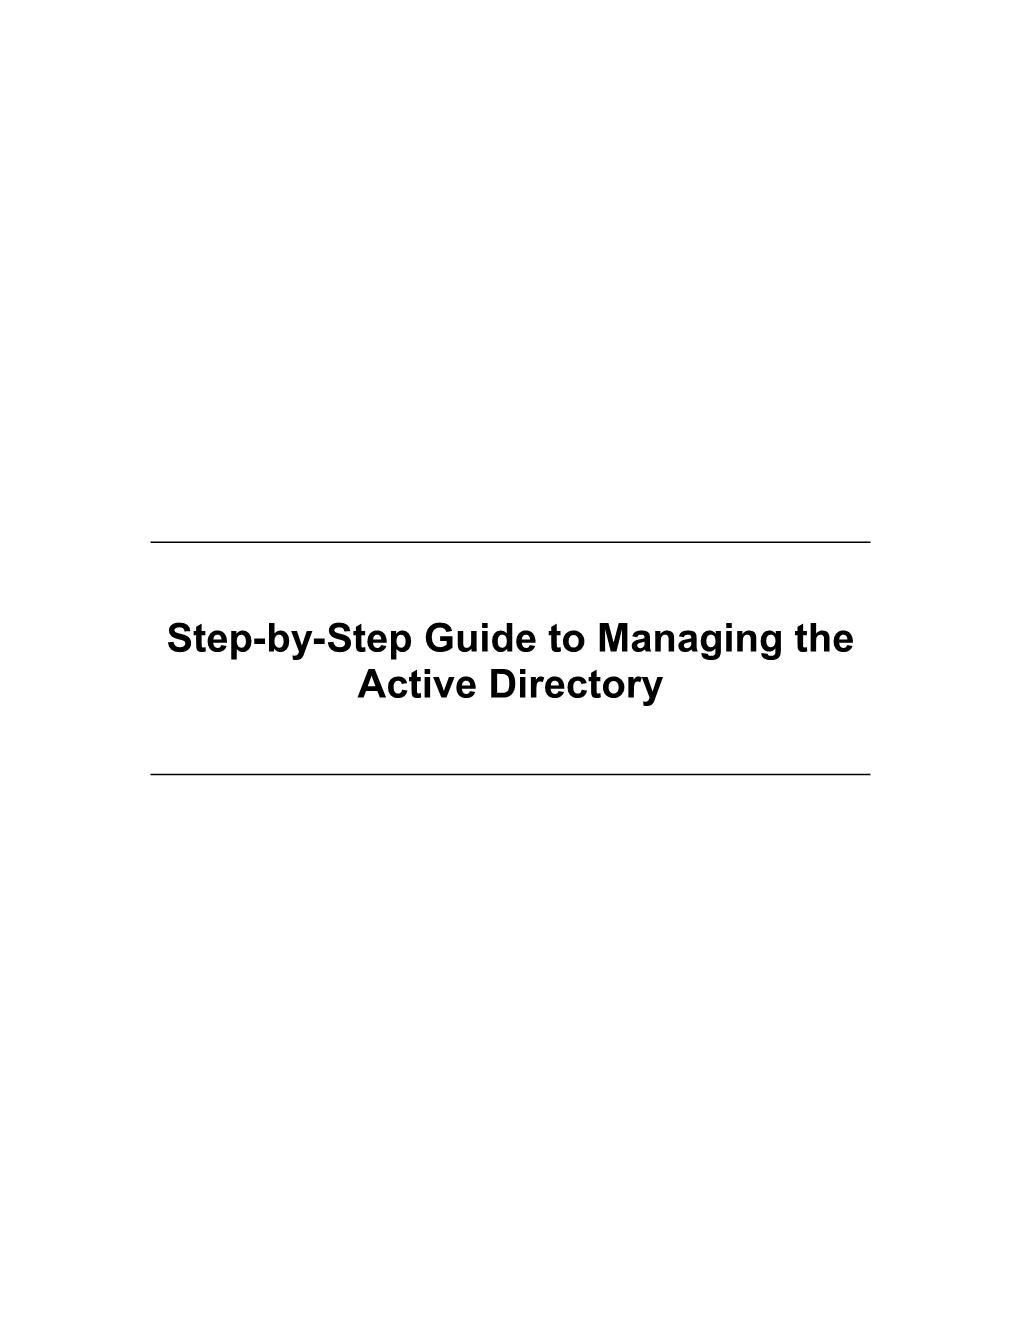 Step-By-Step Guide to Managing the Active Directory